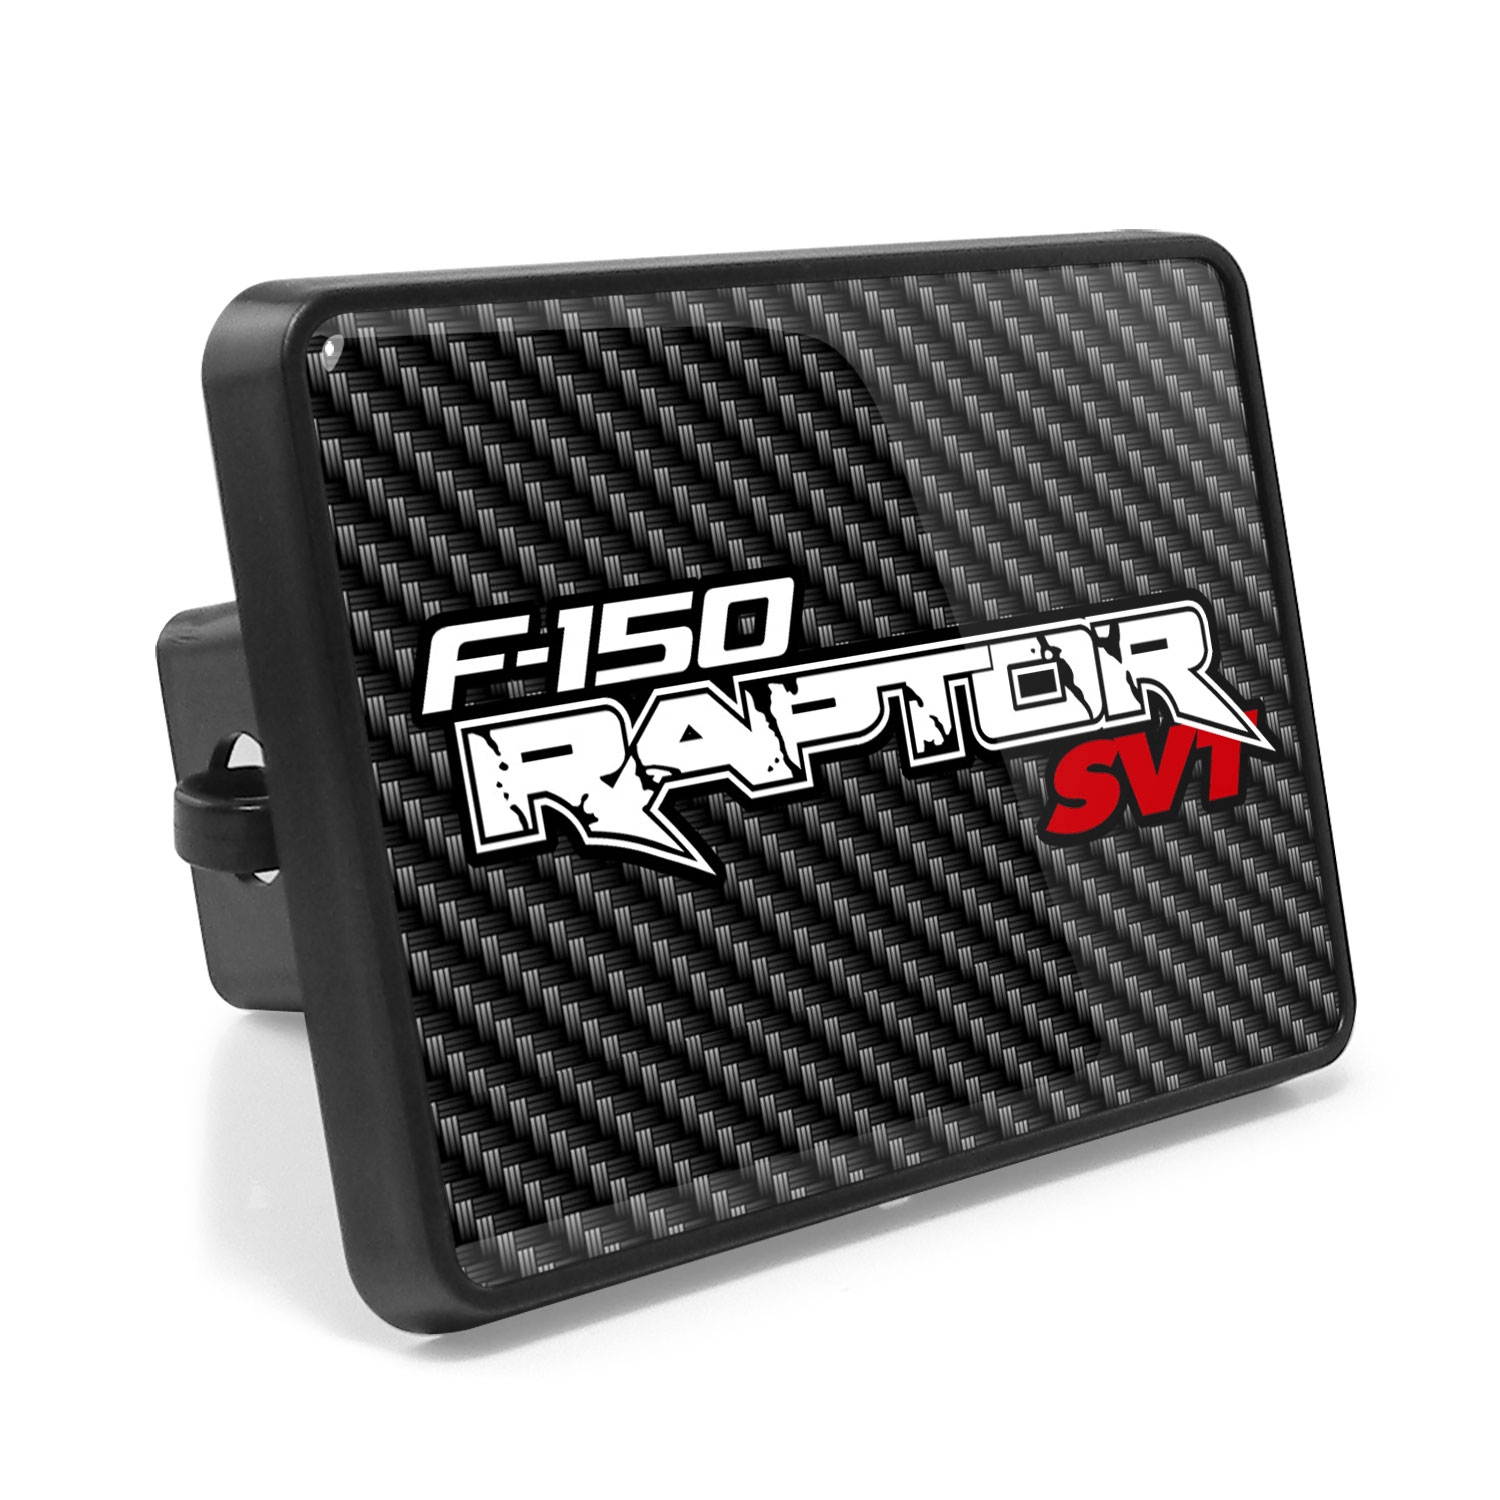 Ford Raptor Carbon Fiber Look UV Graphic Metal Plate on ABS Plastic 2 inch Tow Hitch Cover